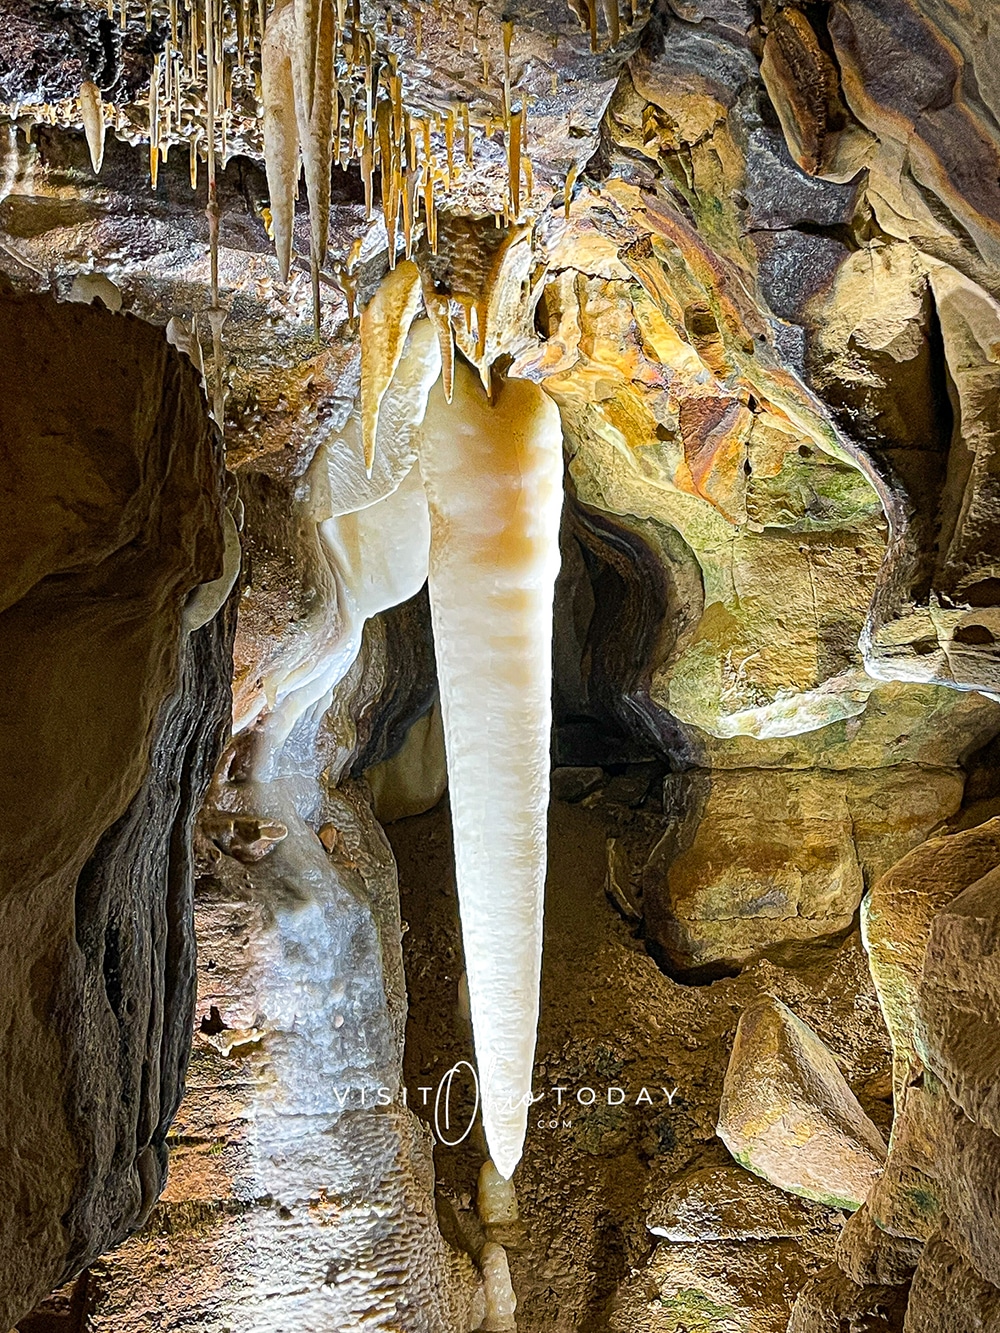 vertical photo of the ohio caverns with a large white stalactite and other small stalactite hanging from the top